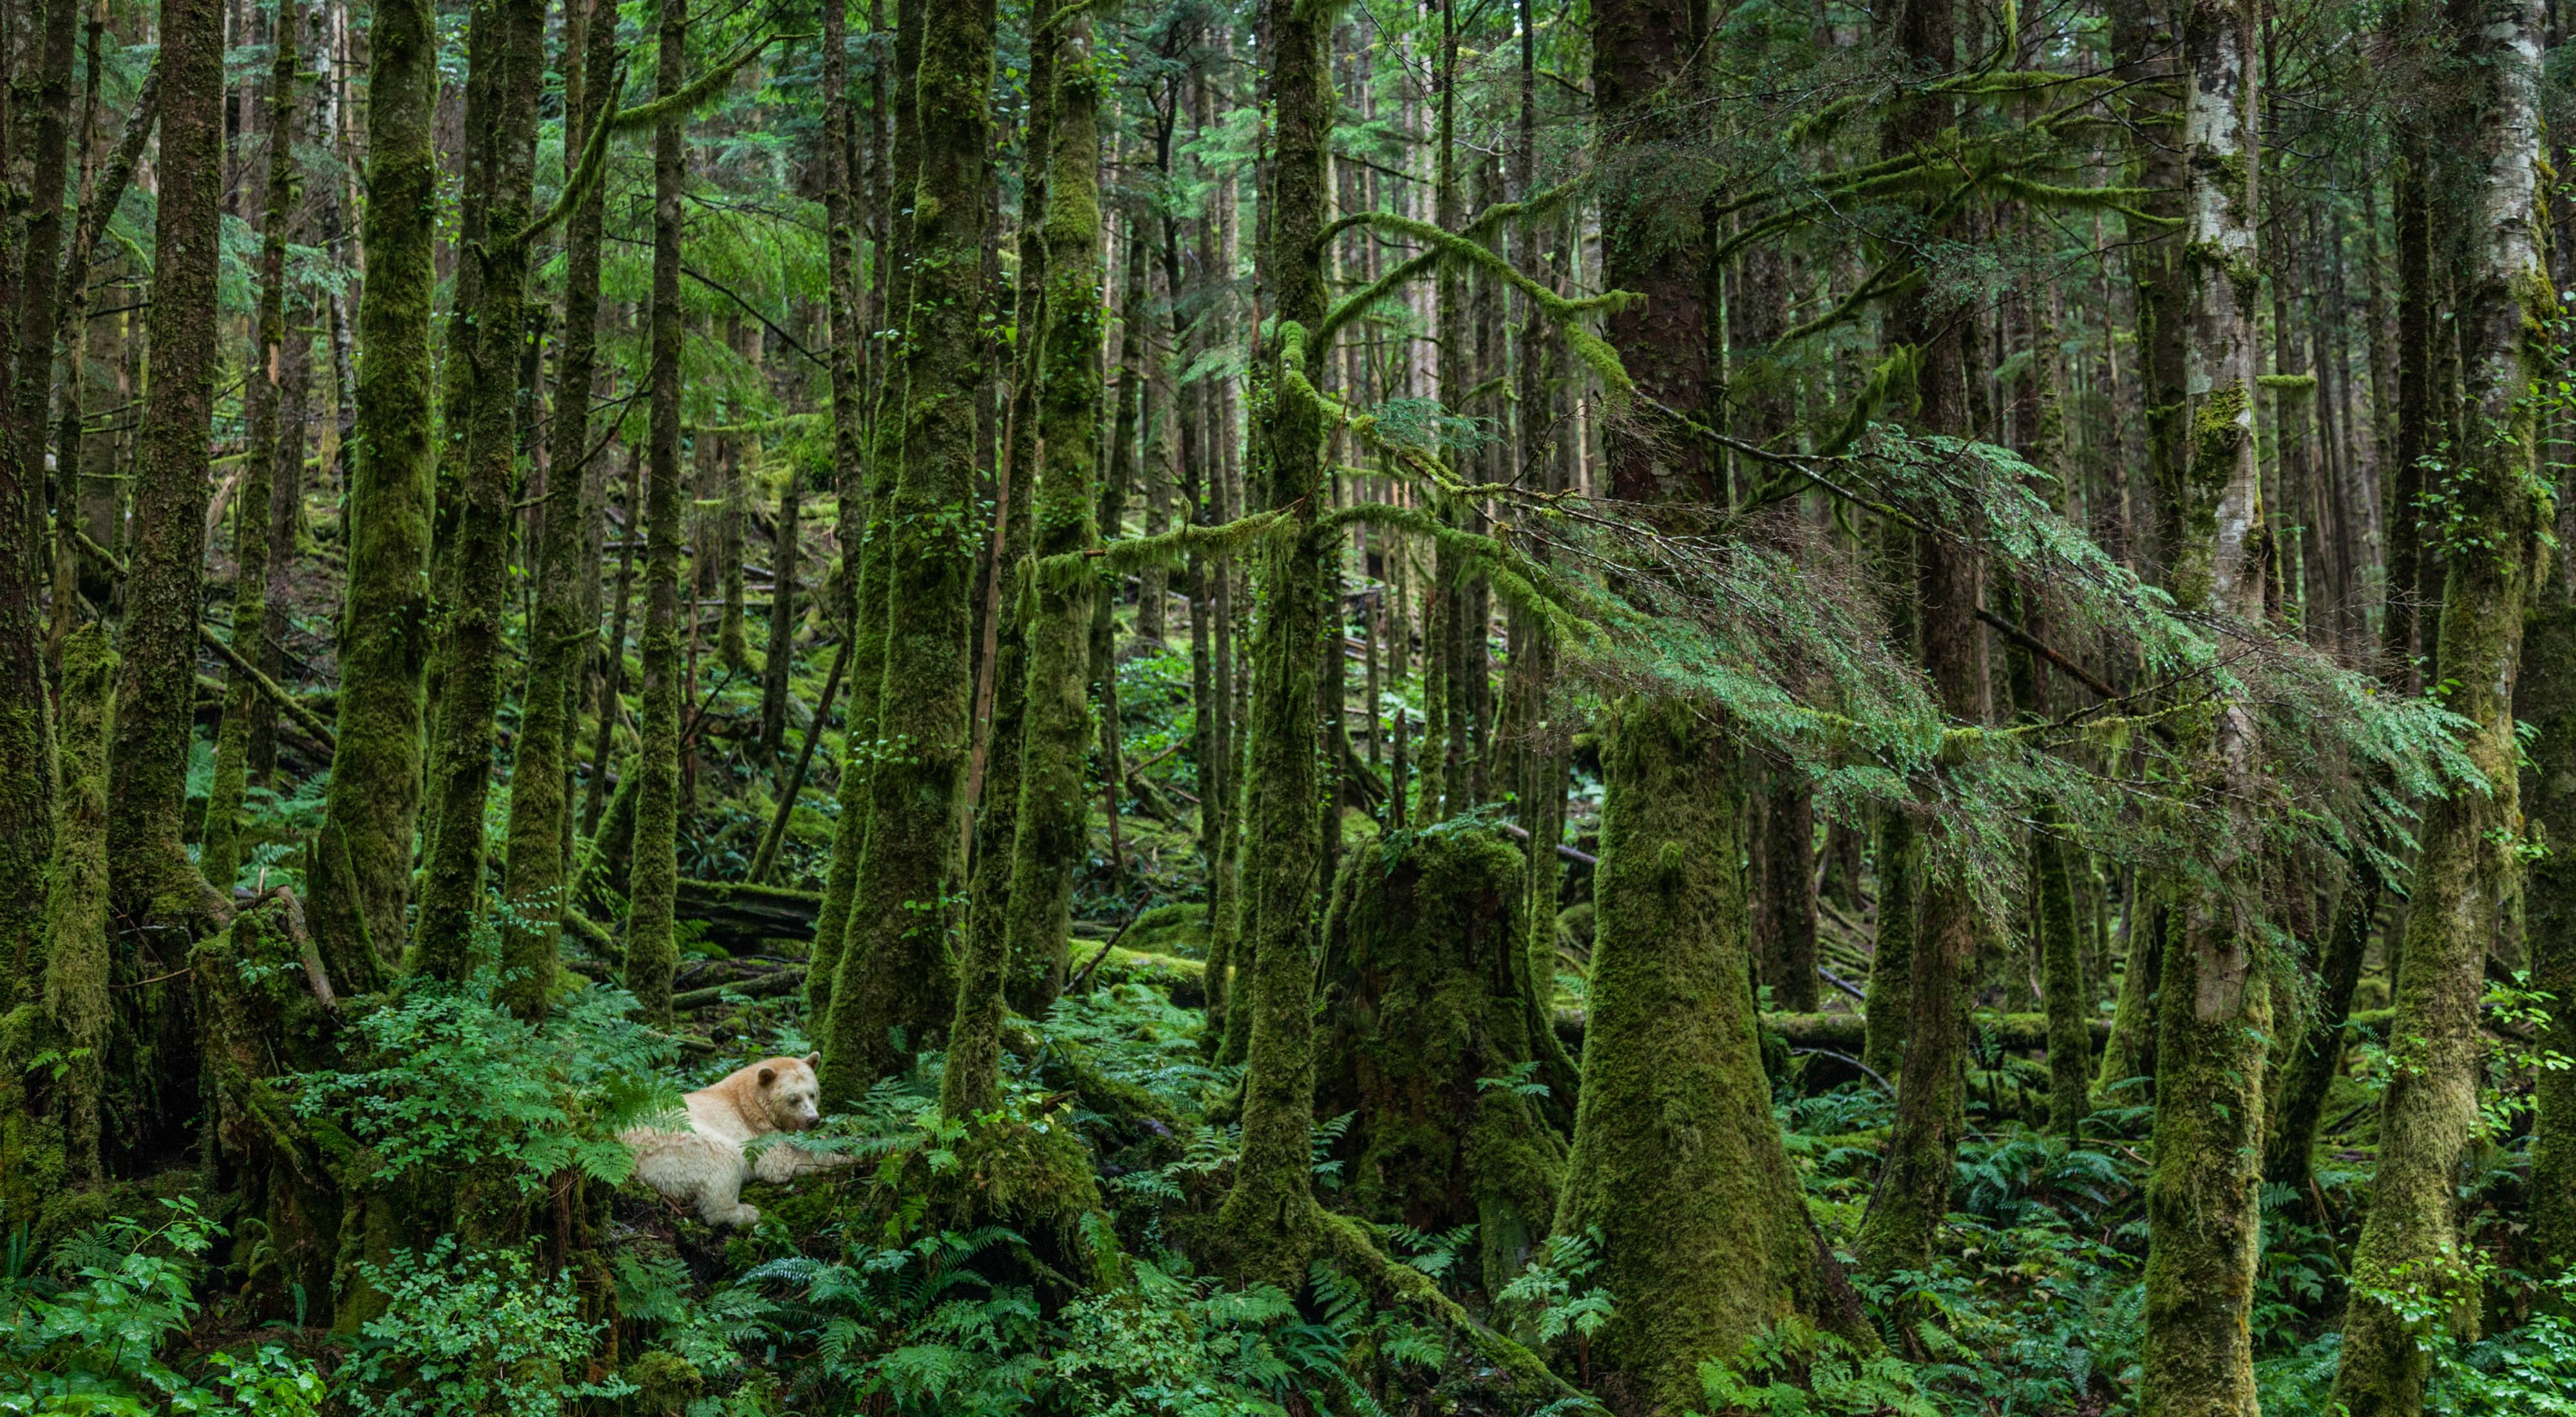 A white bear in the Great Bear Rainforest, Canada